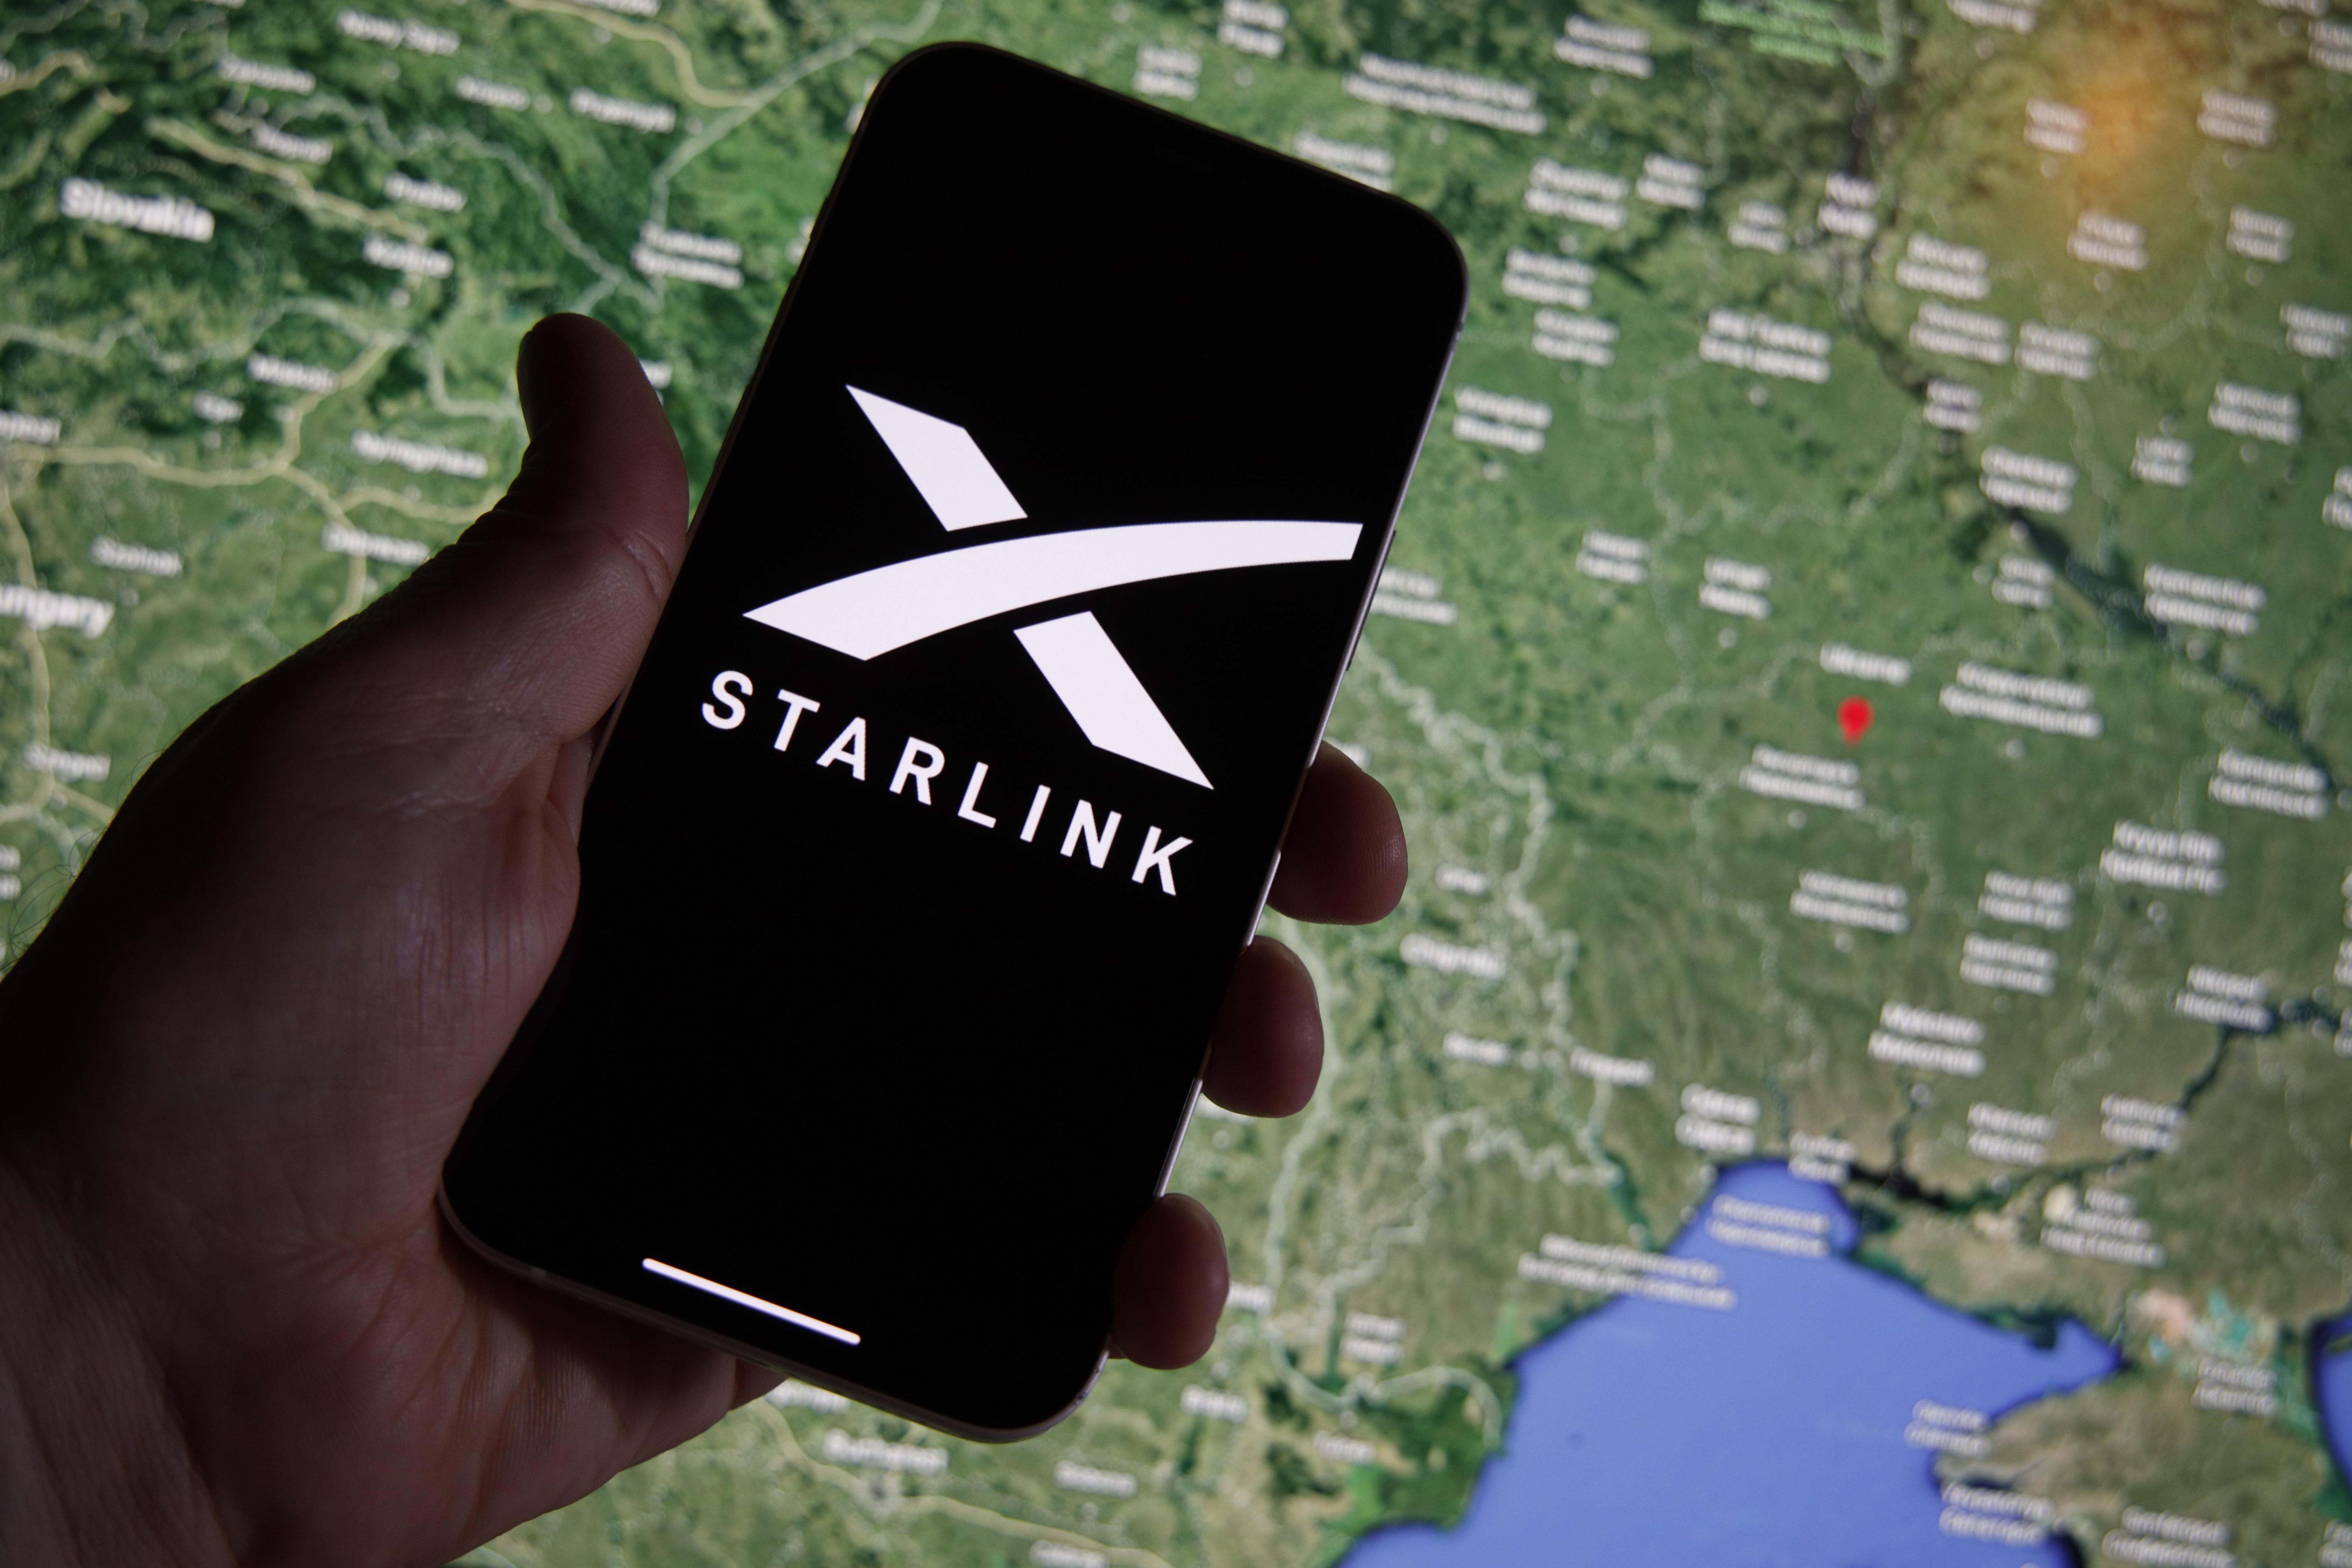 Starlink logo seen on a mobile device with Ukraine on a map in the background.